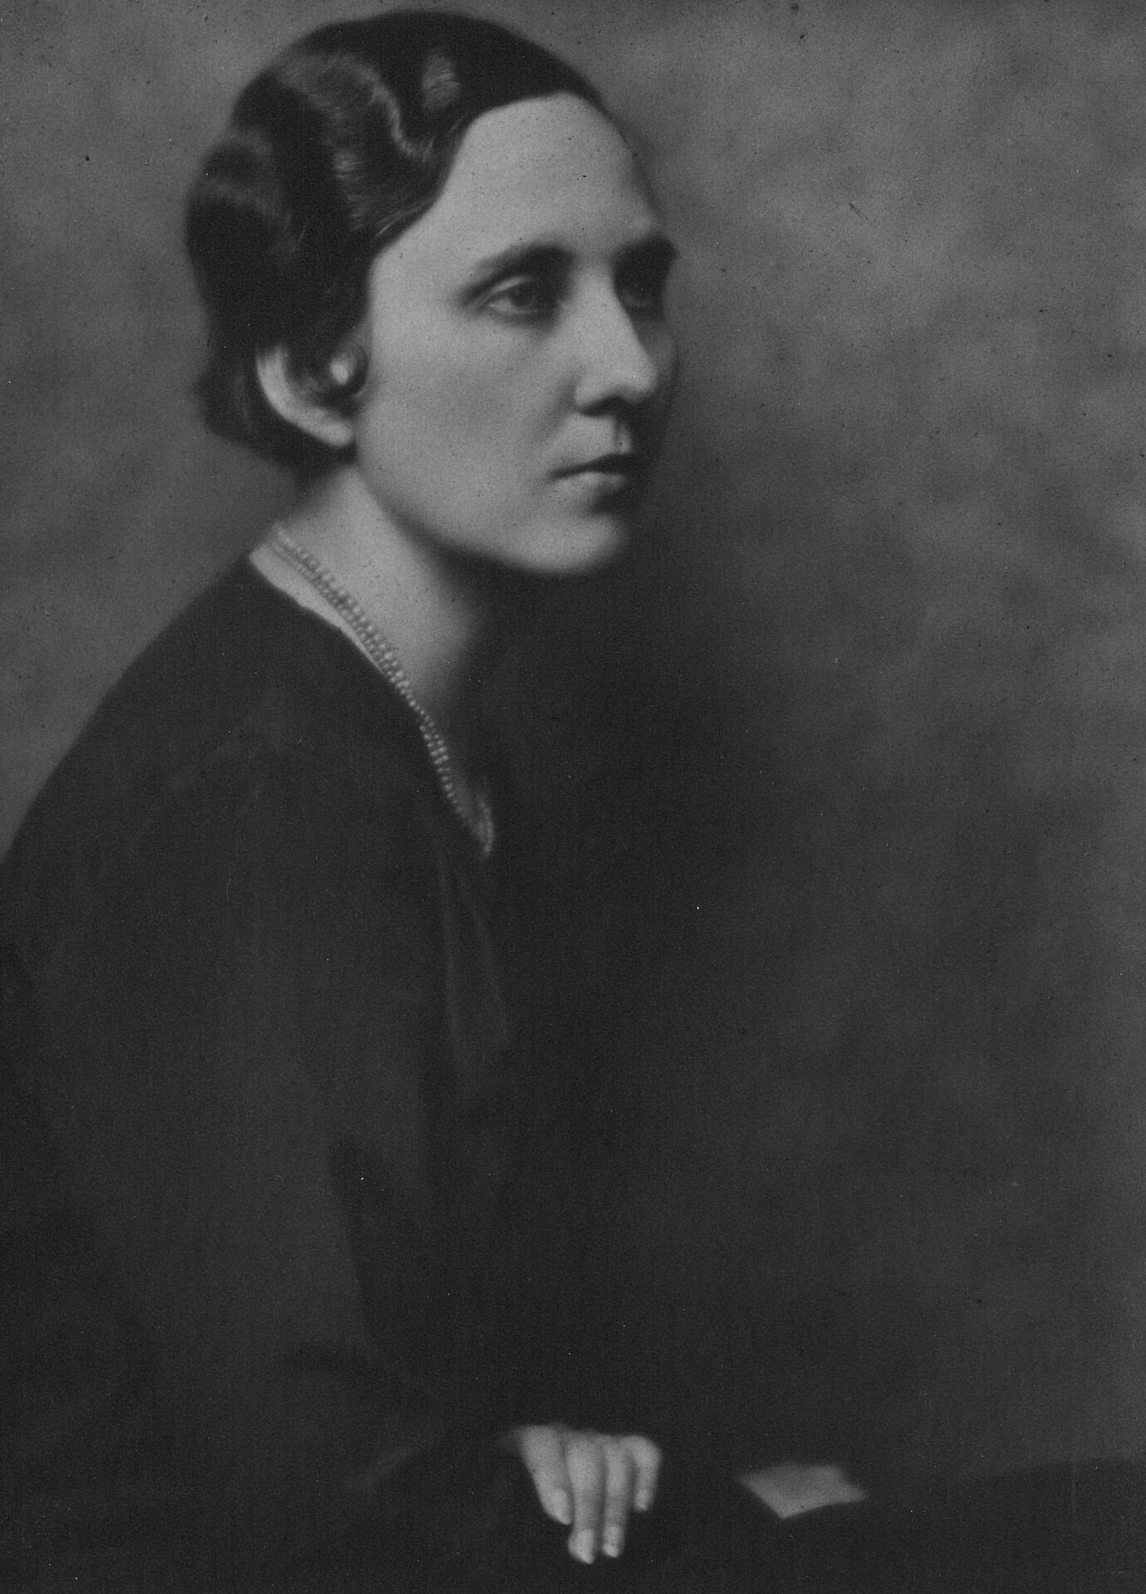 Art Canada Institute, Portrait of Prudence Heward in London, photograph by Hugh Cecil, 1930